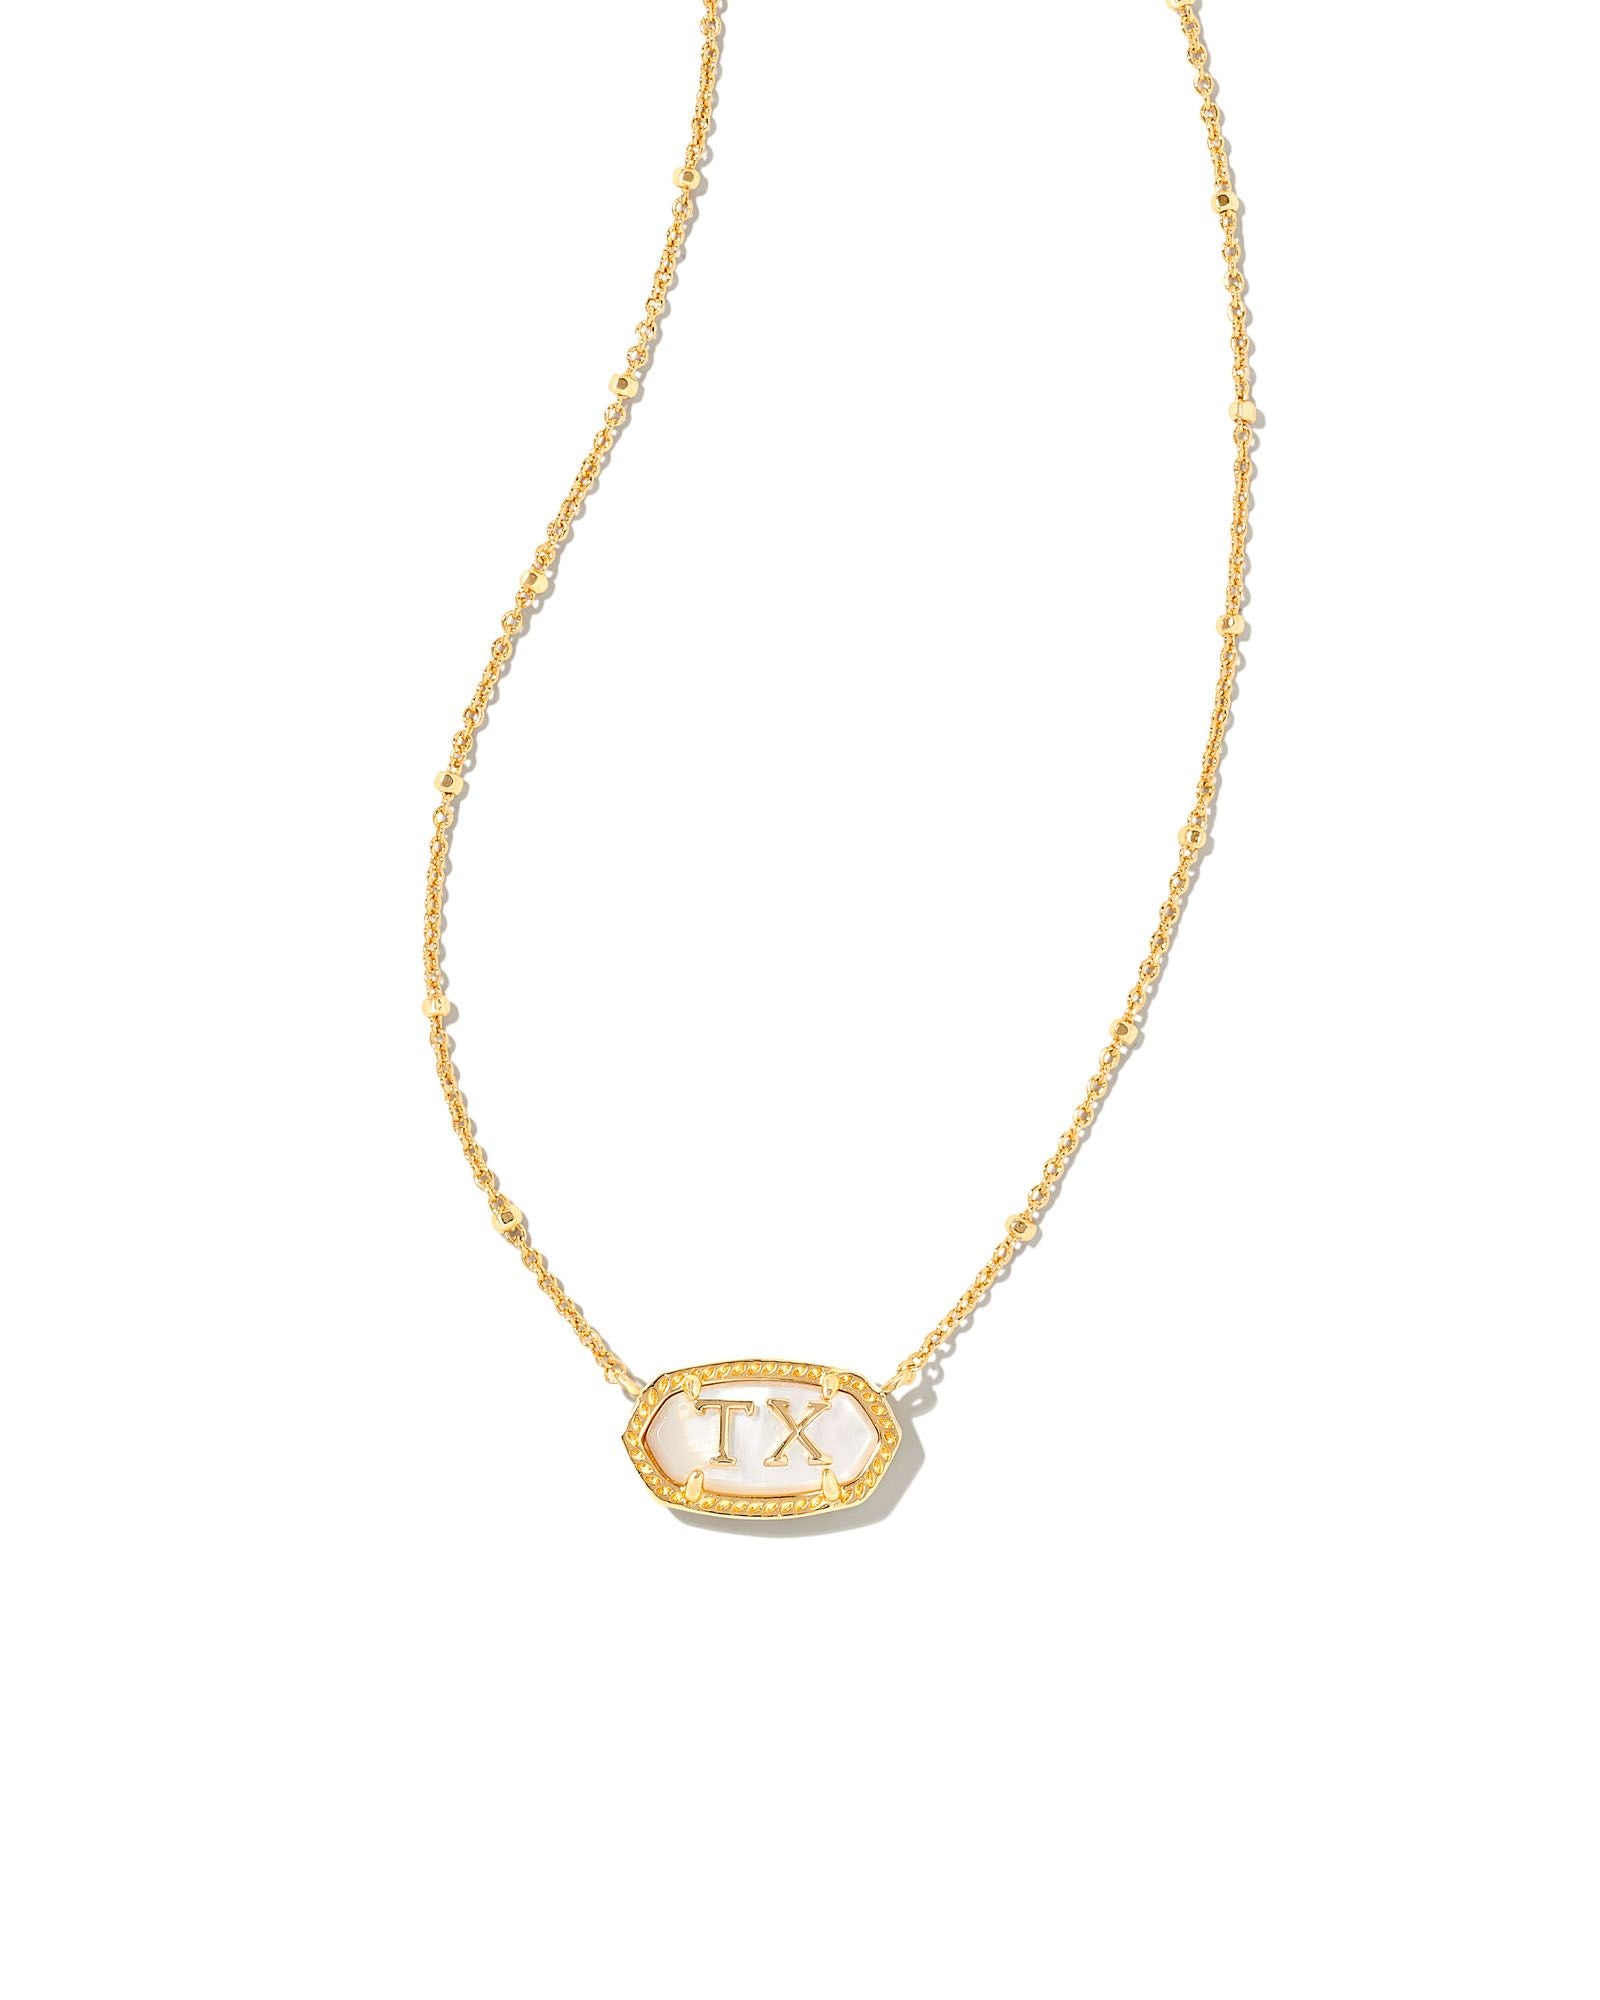 Elisa Texas Necklace in Gold Ivory Mother of Pearl